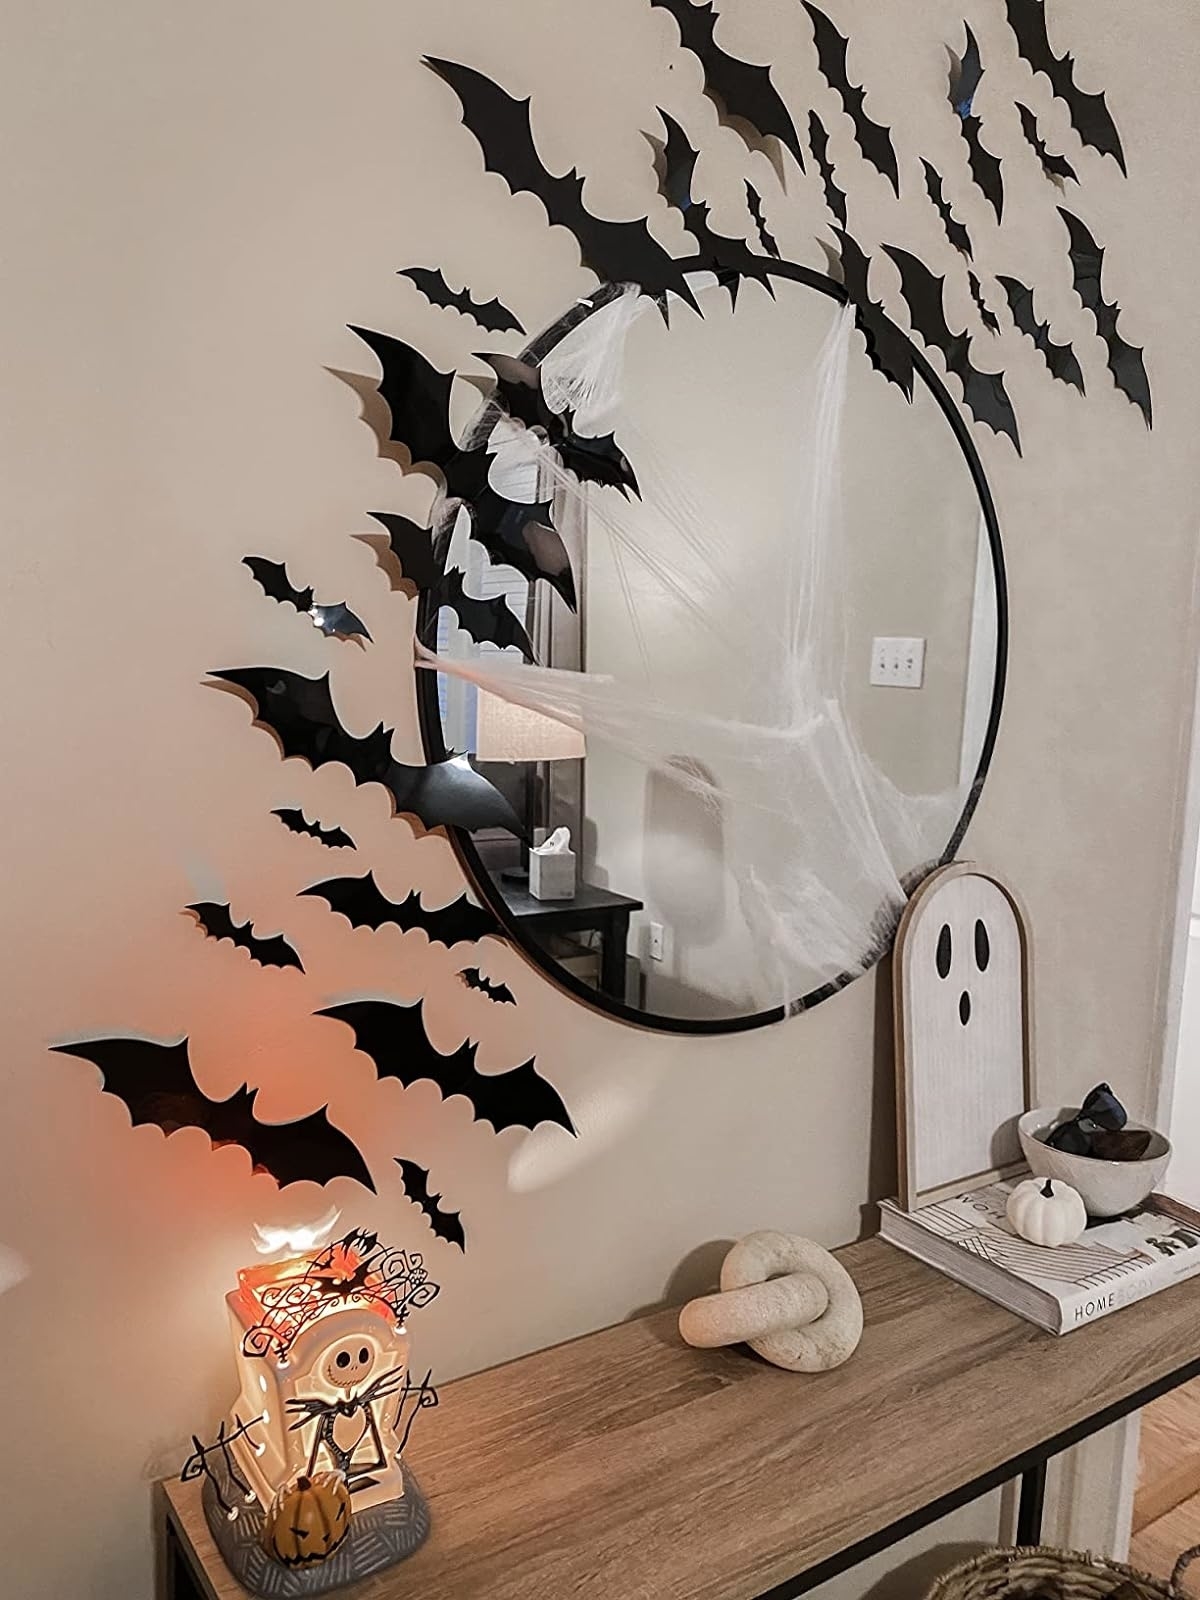 Reviewer image of the bats stuck on the wall around a mirror above a console